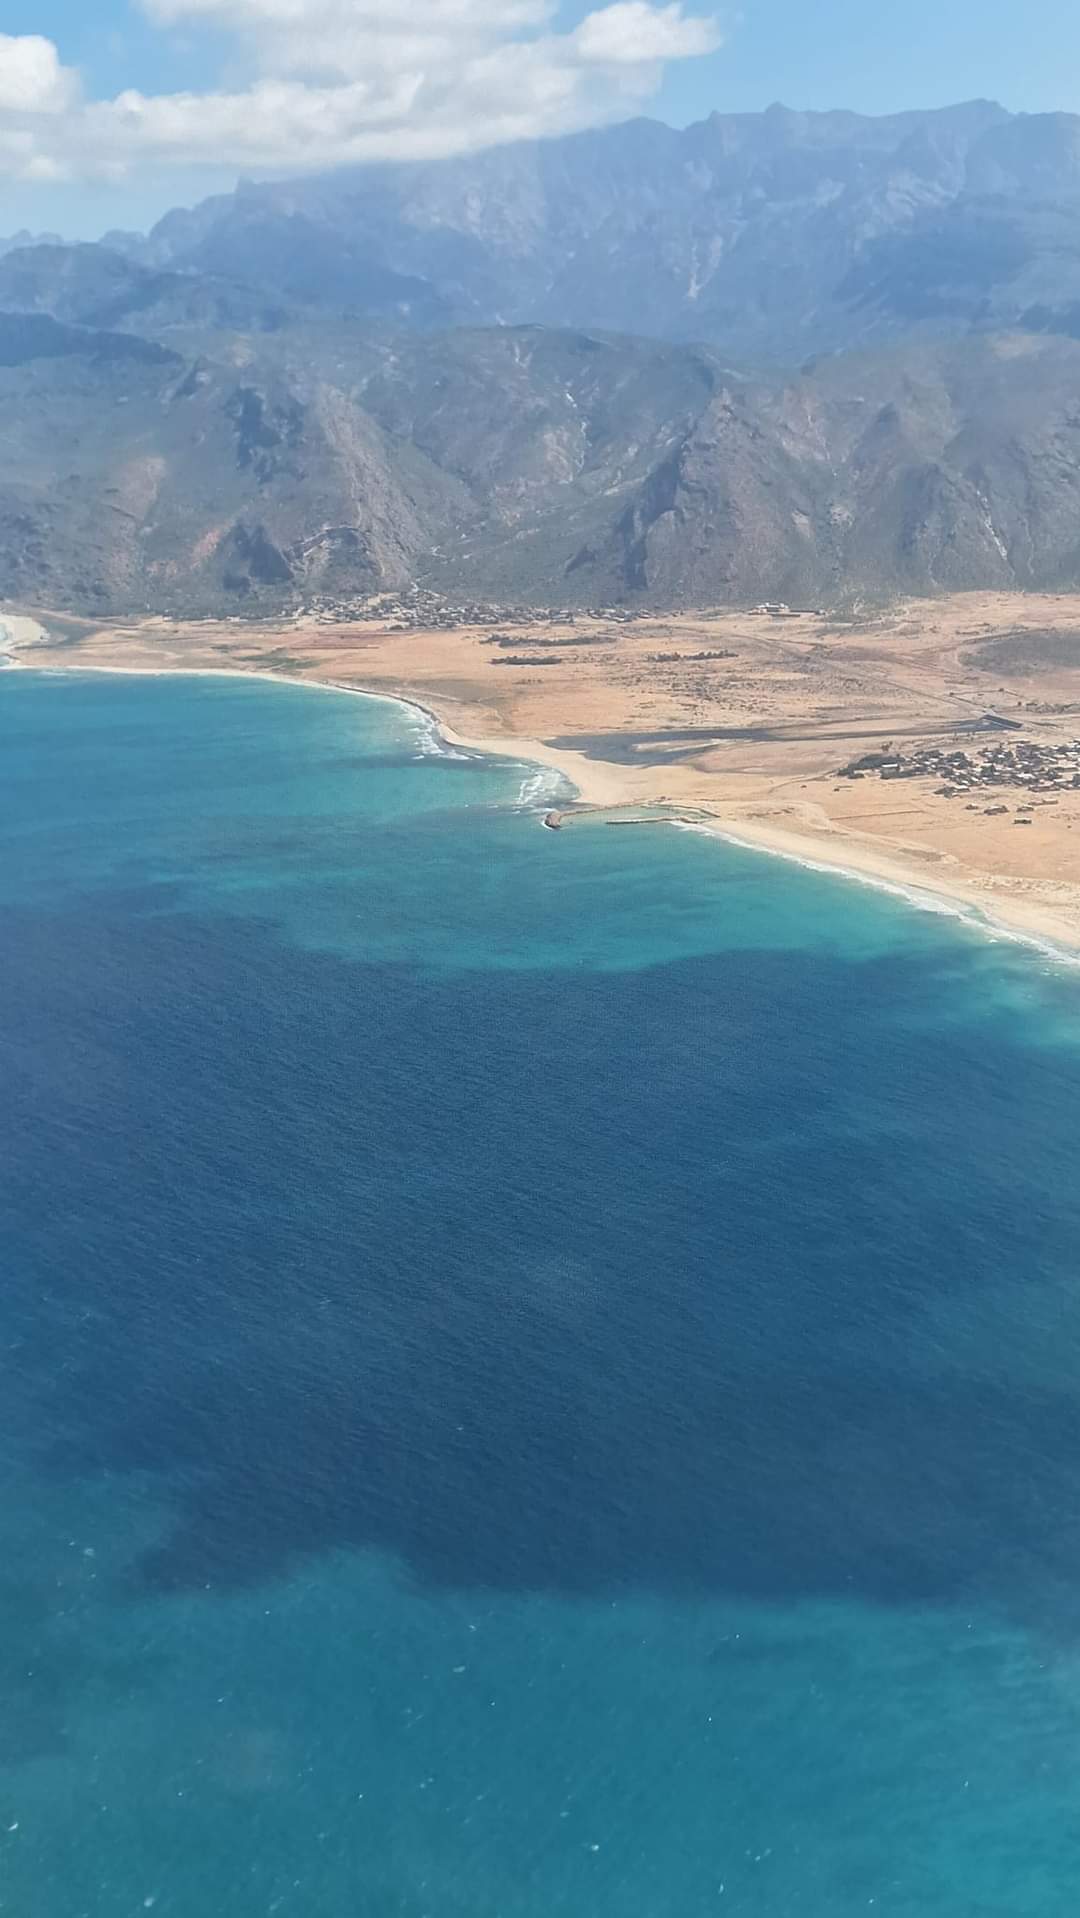 A view of Socotra from the plane